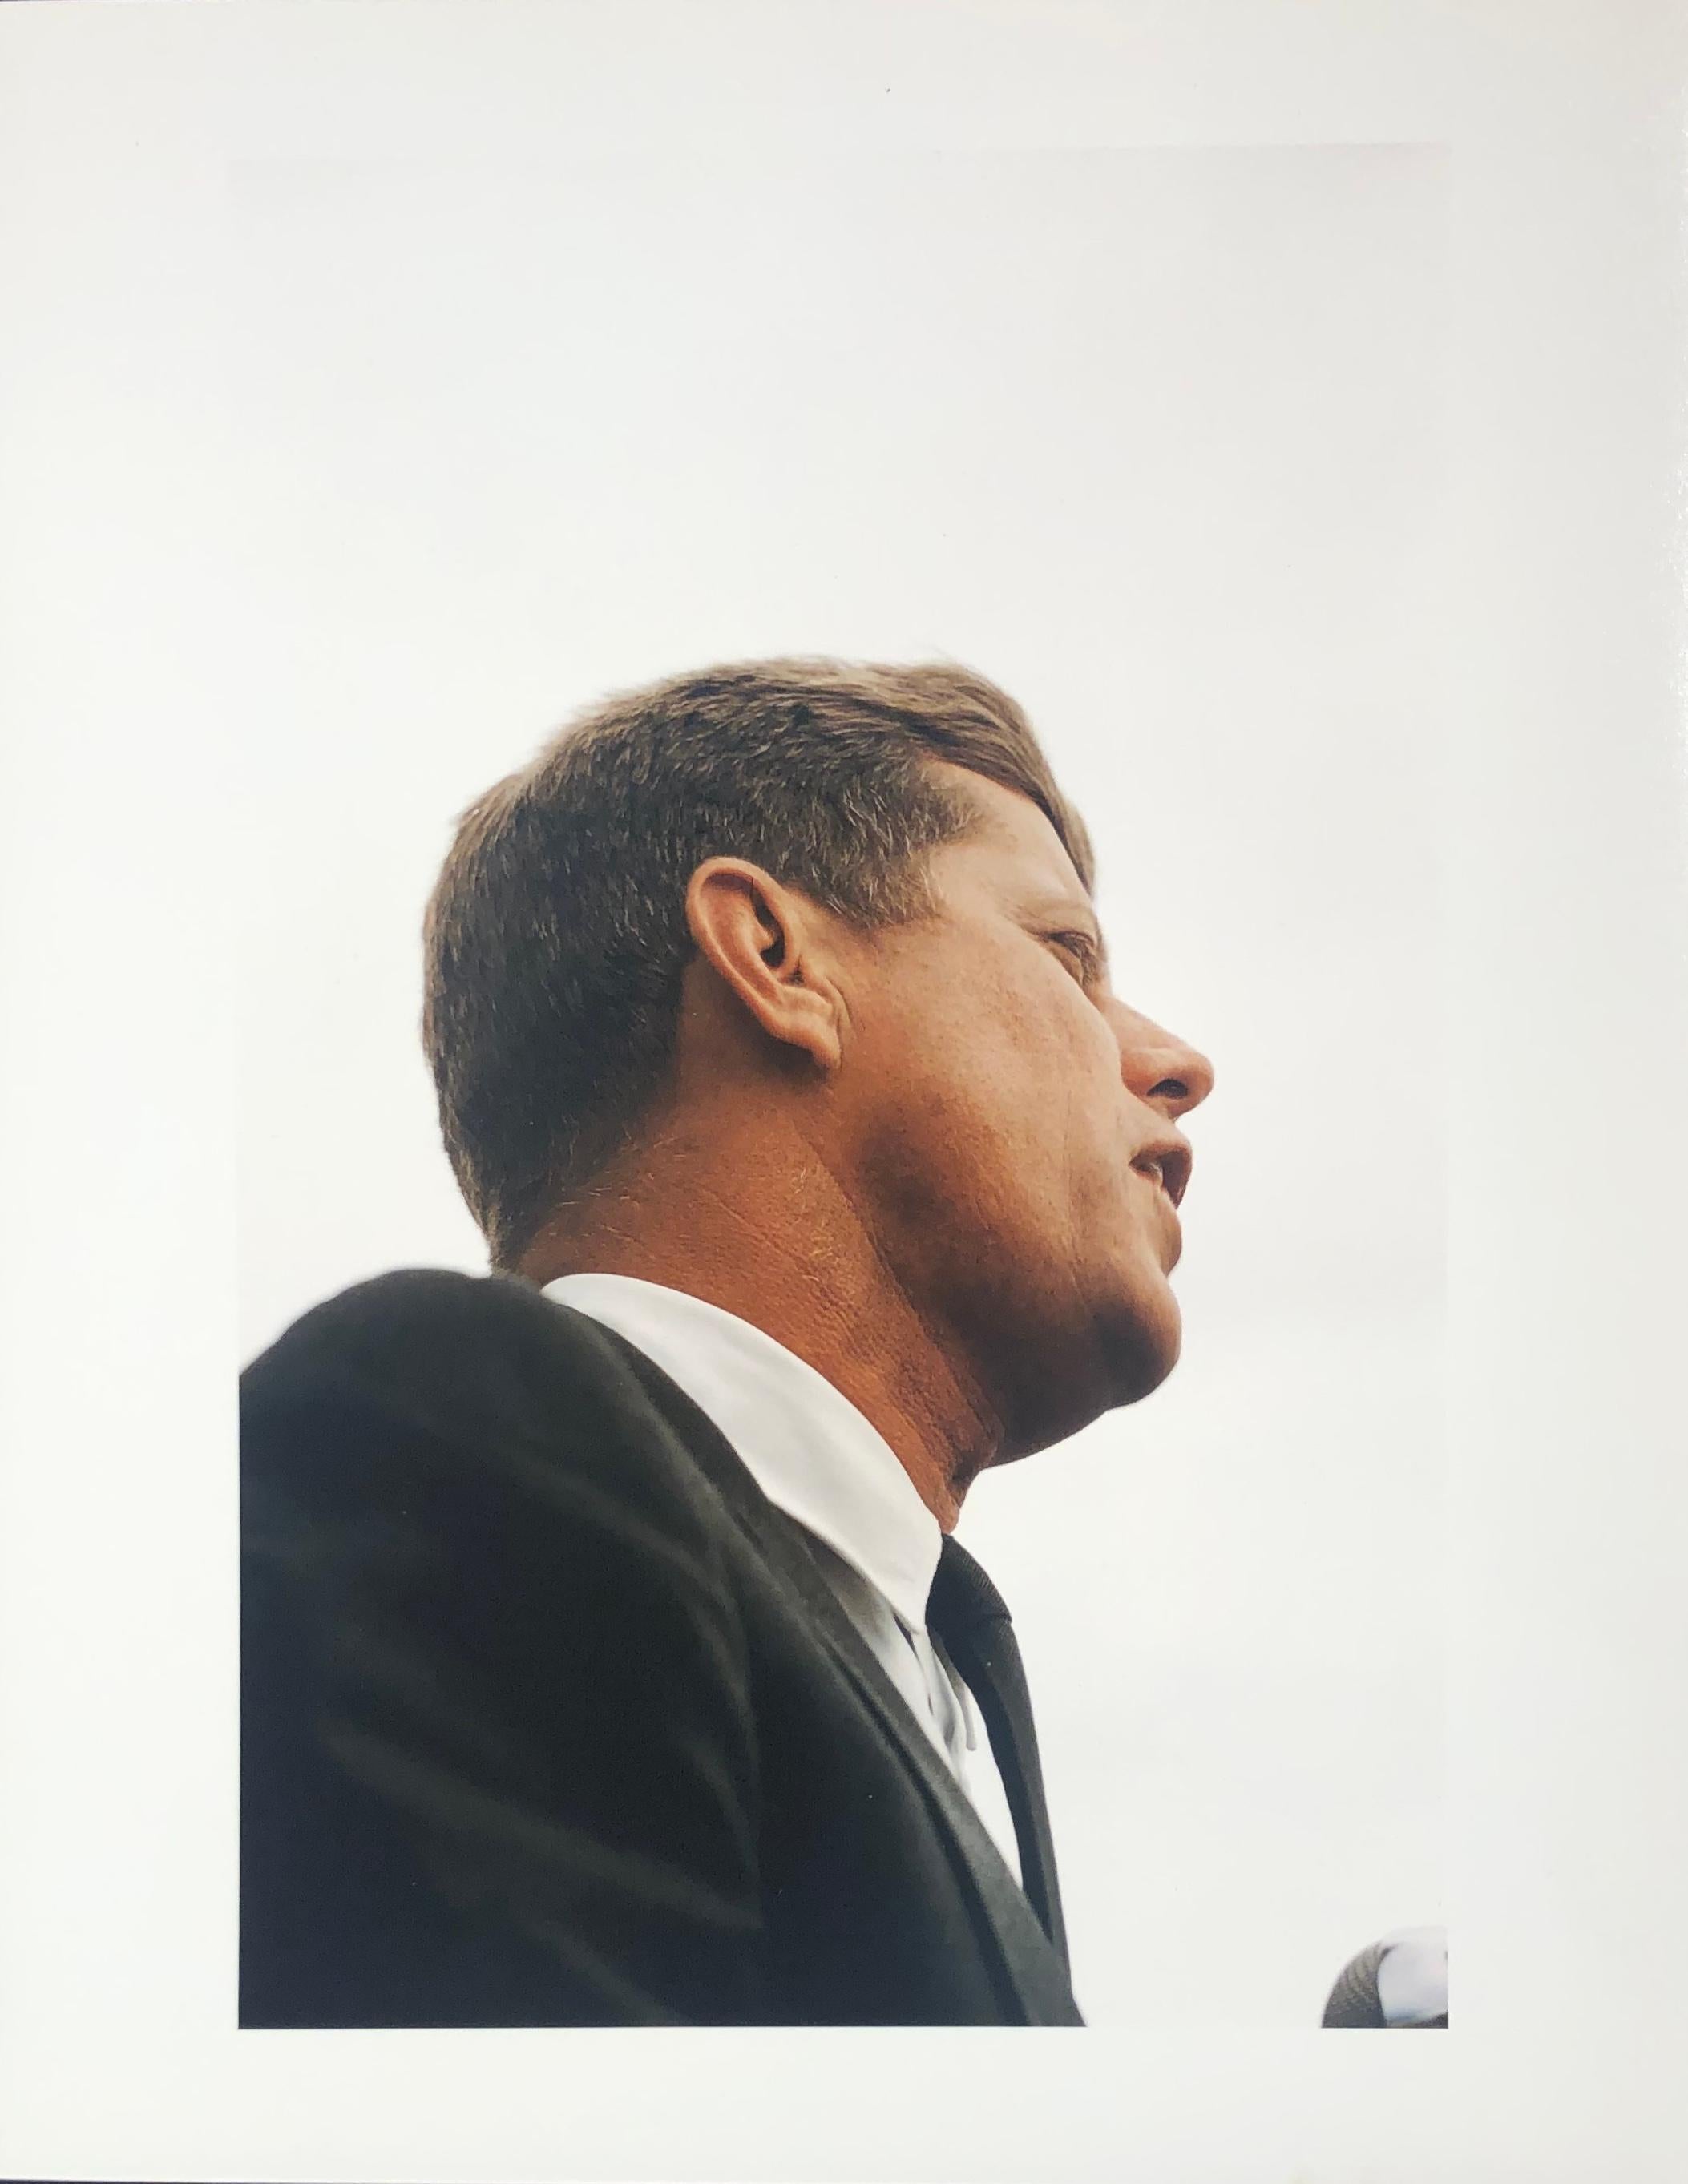 Art Shay Figurative Photograph - JFK in Profile, 1960 - Color Photograph Matted and Framed